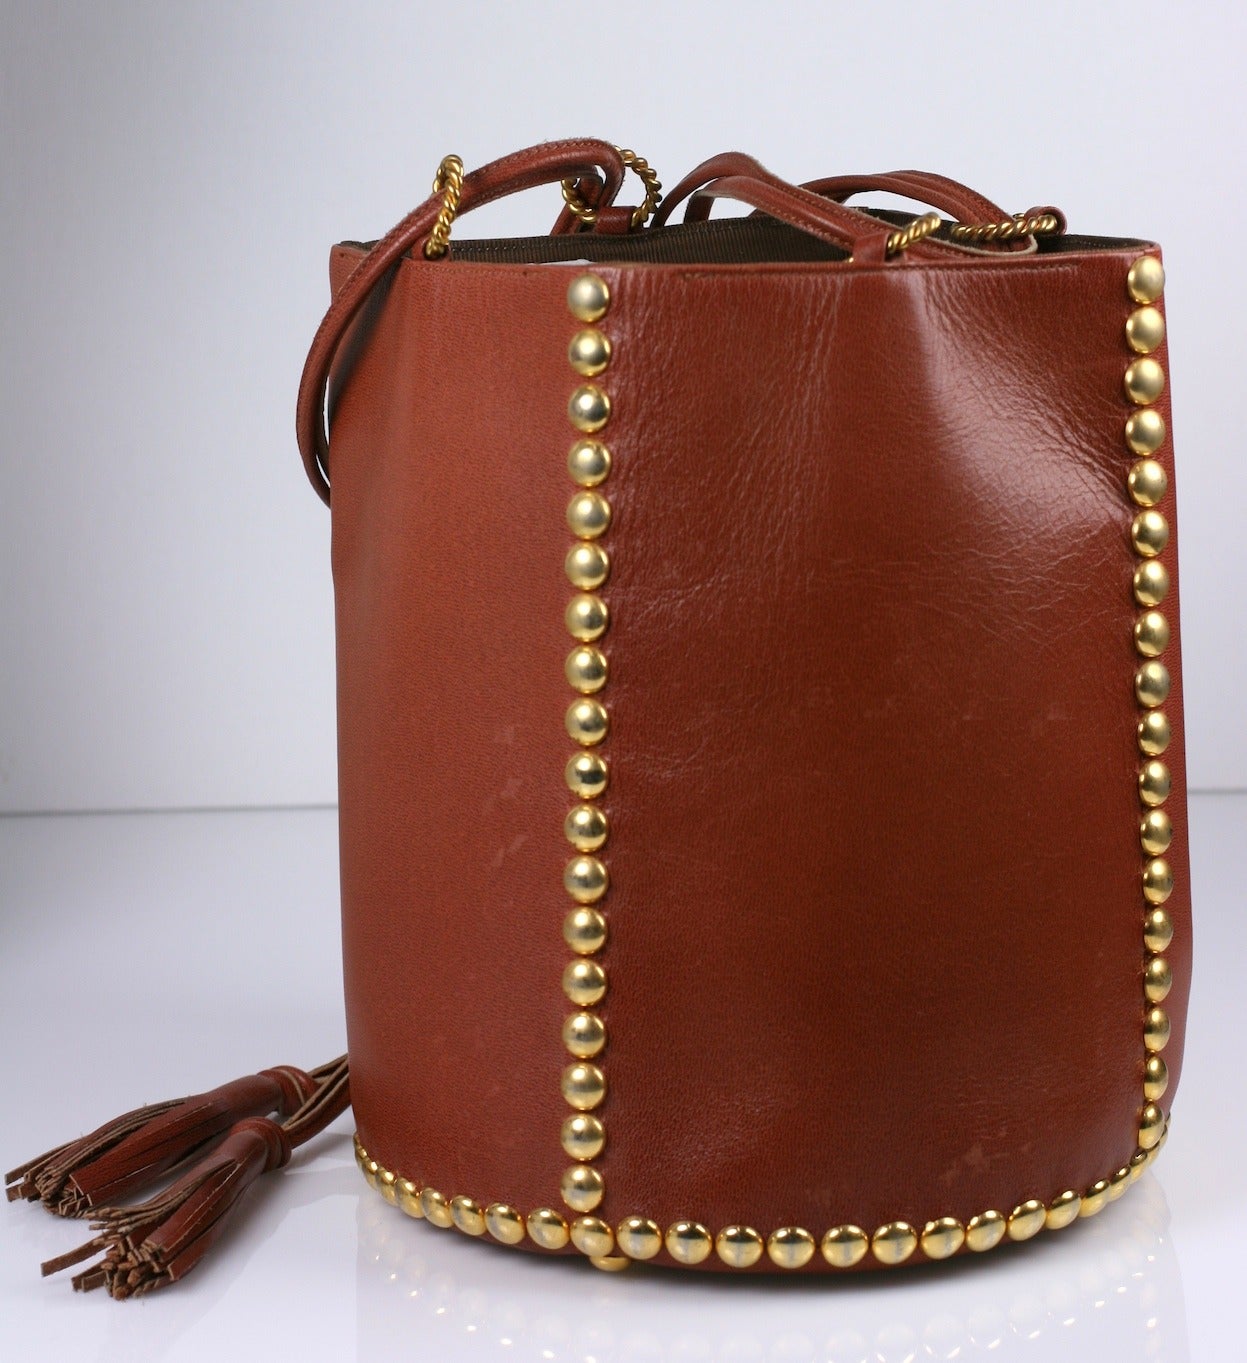 Renaud Pelligrino Studded Bucket Bag in deep caramel leather with round gold studs in 4 lines running down the sides. Leather drawstring with tassel allows bag to work as shoulder or hand held. Lined in faille. 7